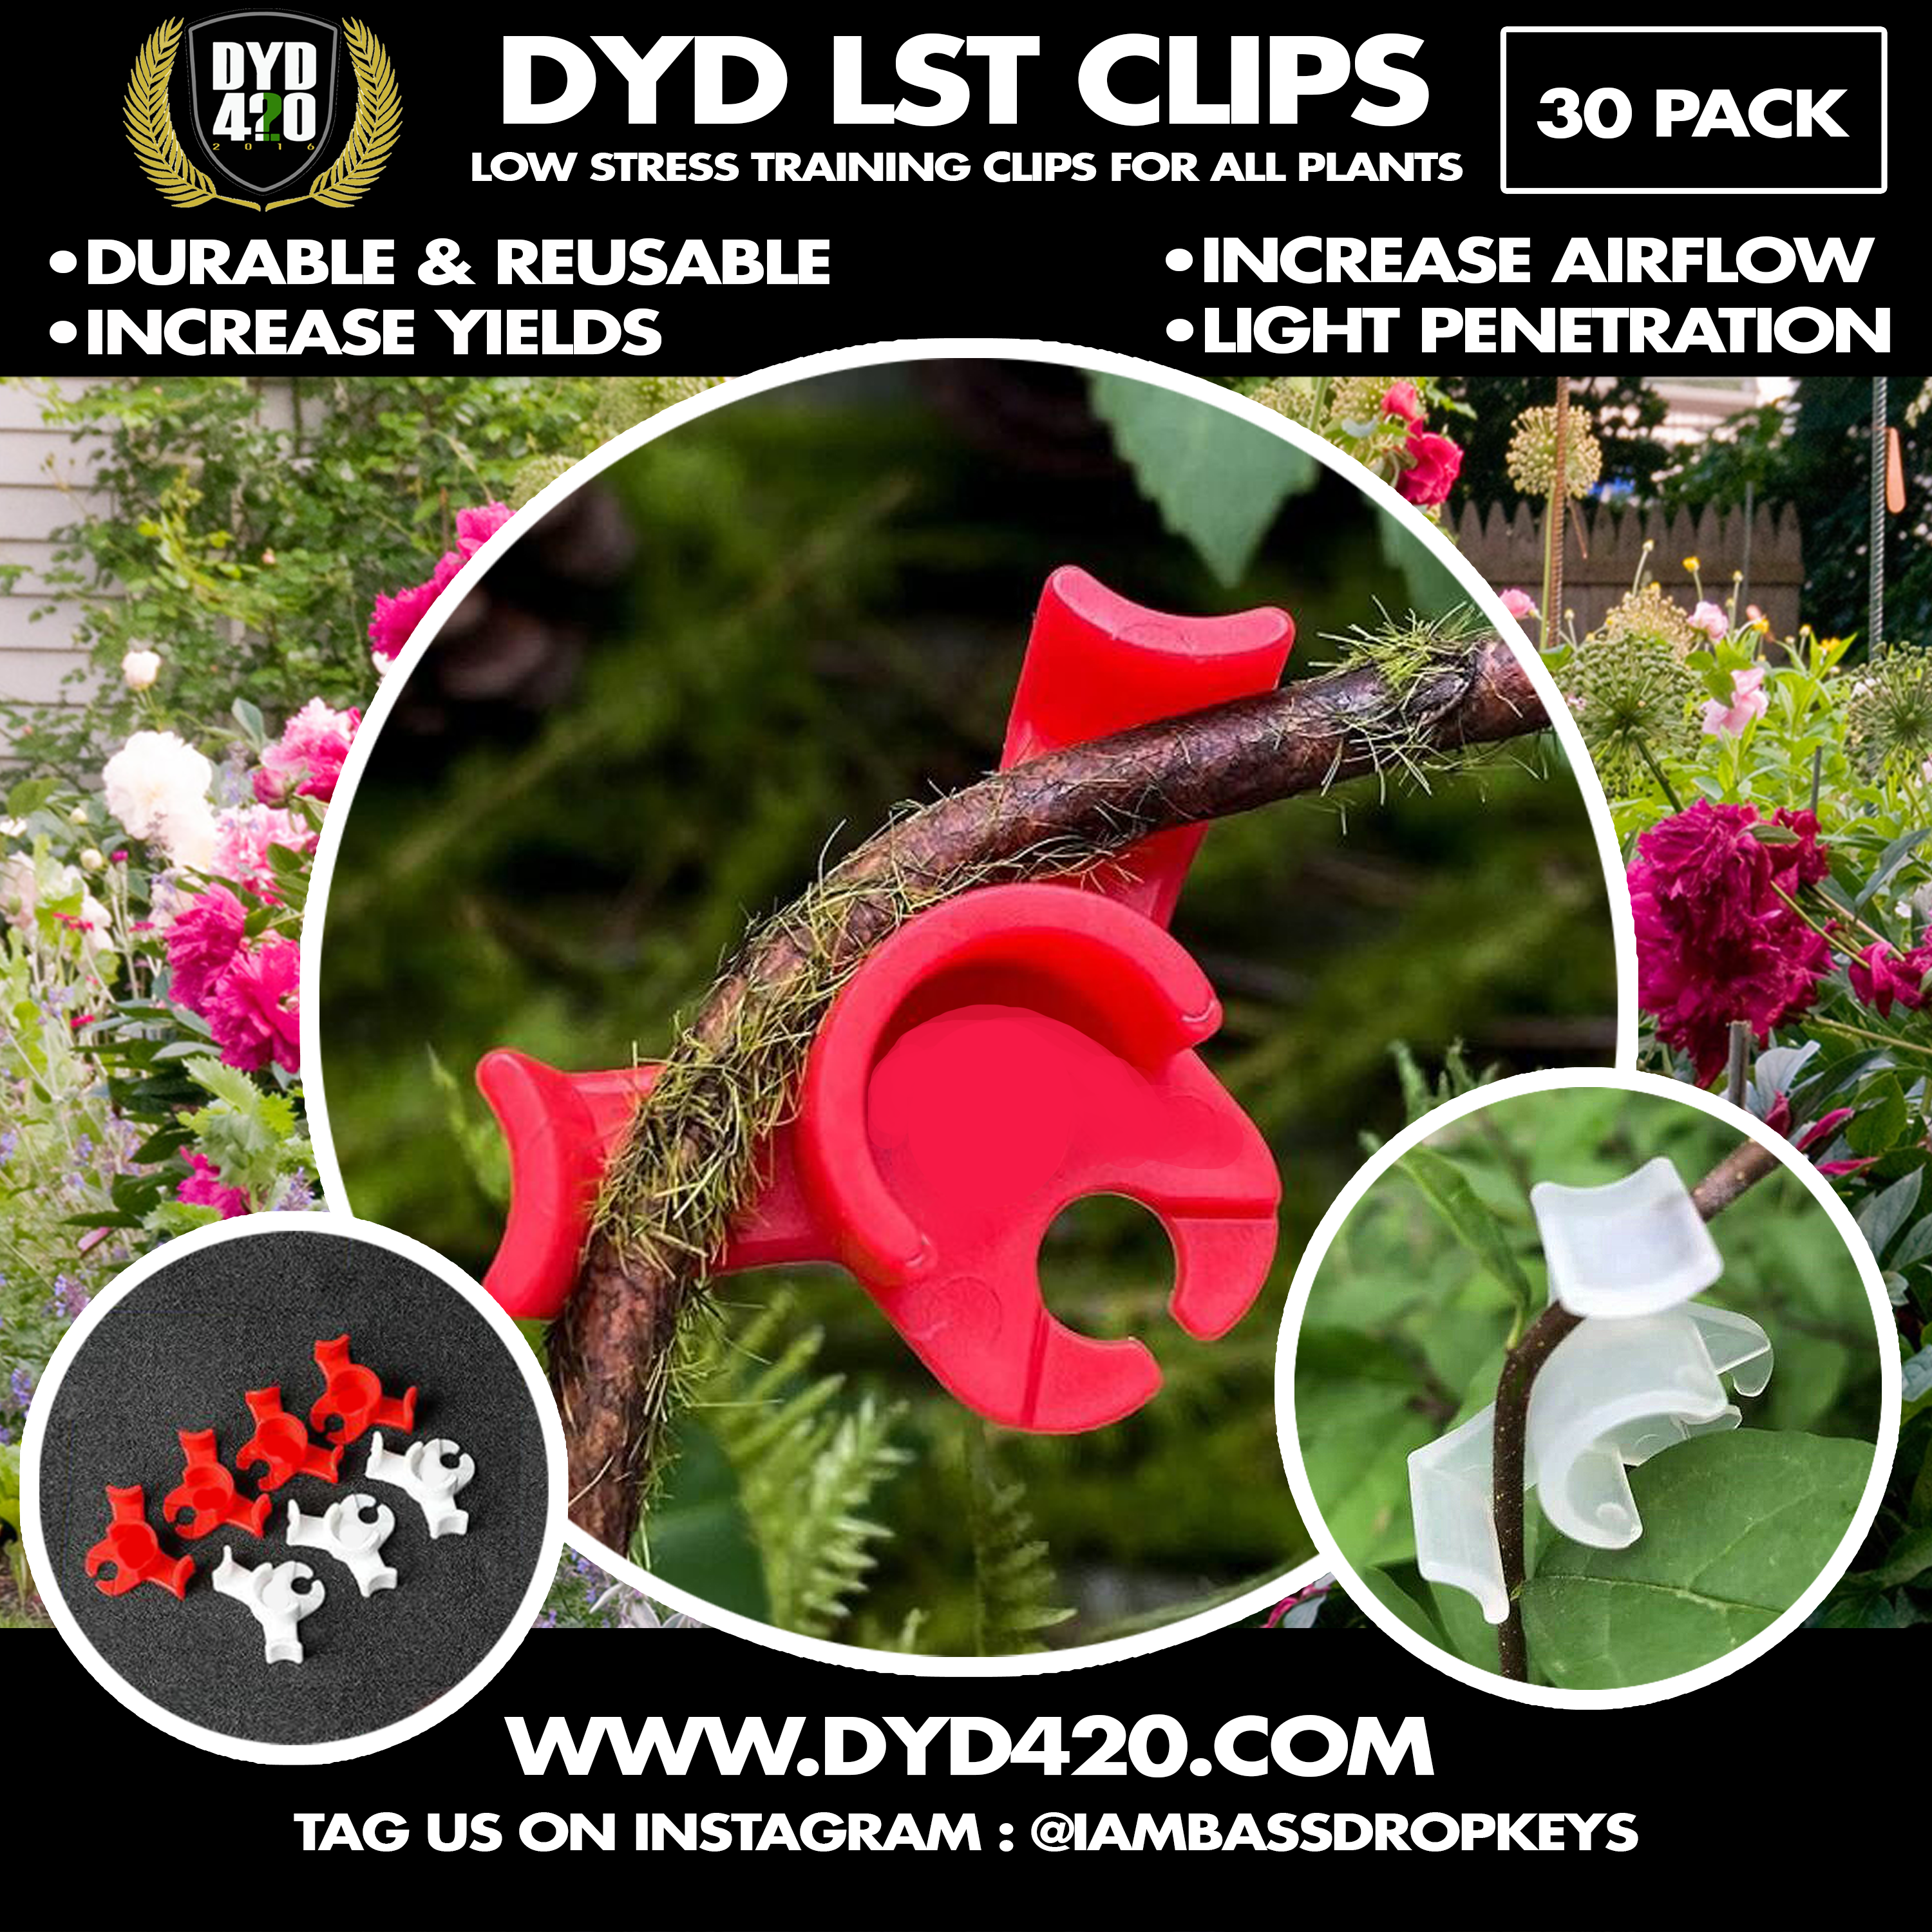 DYD LST CLIPS - 30 Pack